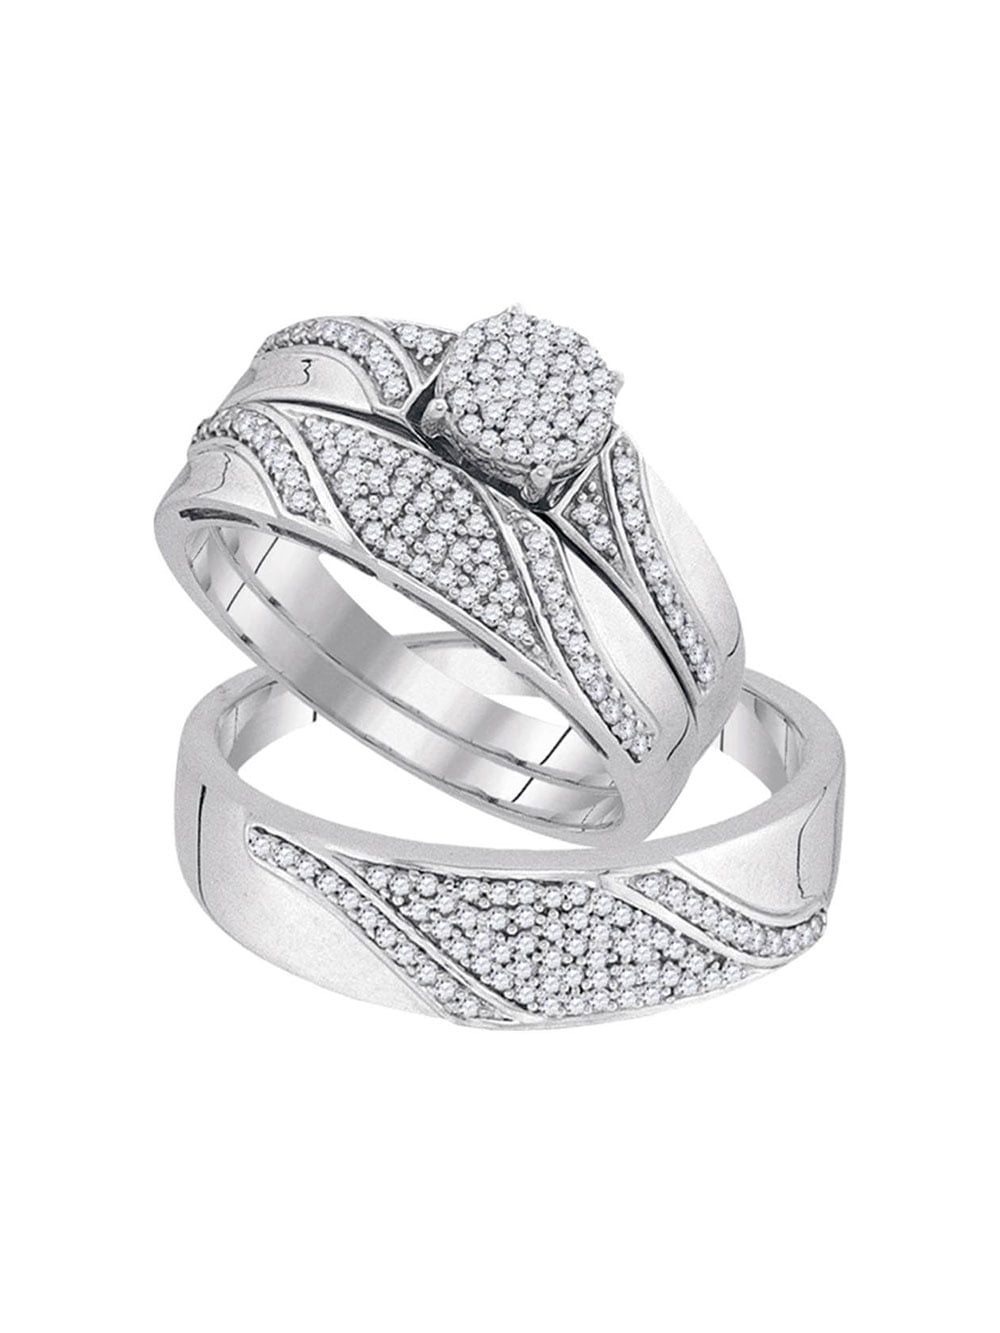 Details about   Engagement Wedding Bridal Ring Band In Round Diamond in 14k White Gold Finish 